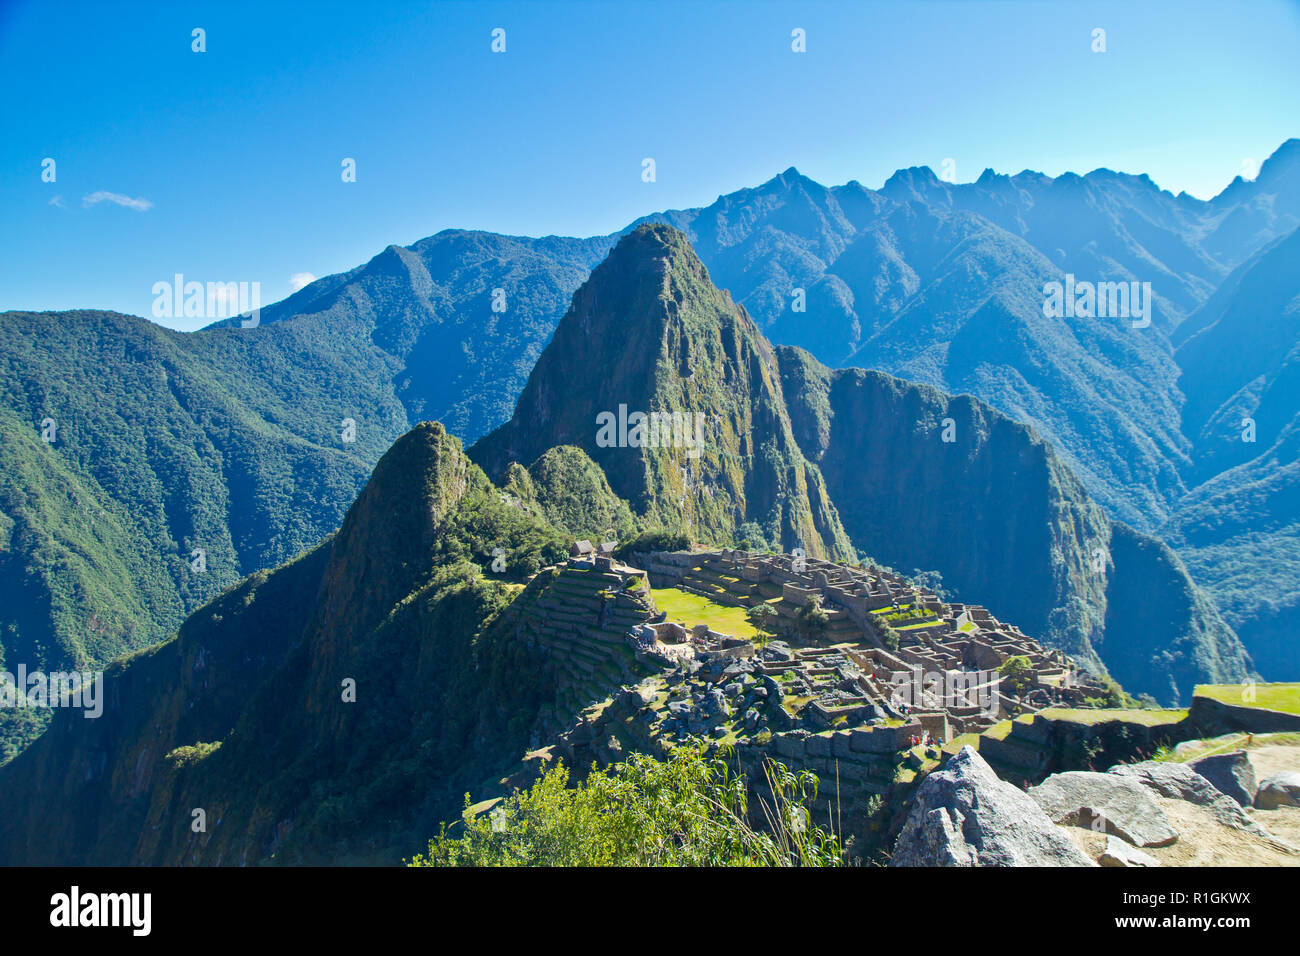 Machu Picchu, an Incan citadel set high in the Andes Mountains, Peru, above the Urubamba River valley. Built in the 15th century and later abandonded Stock Photo